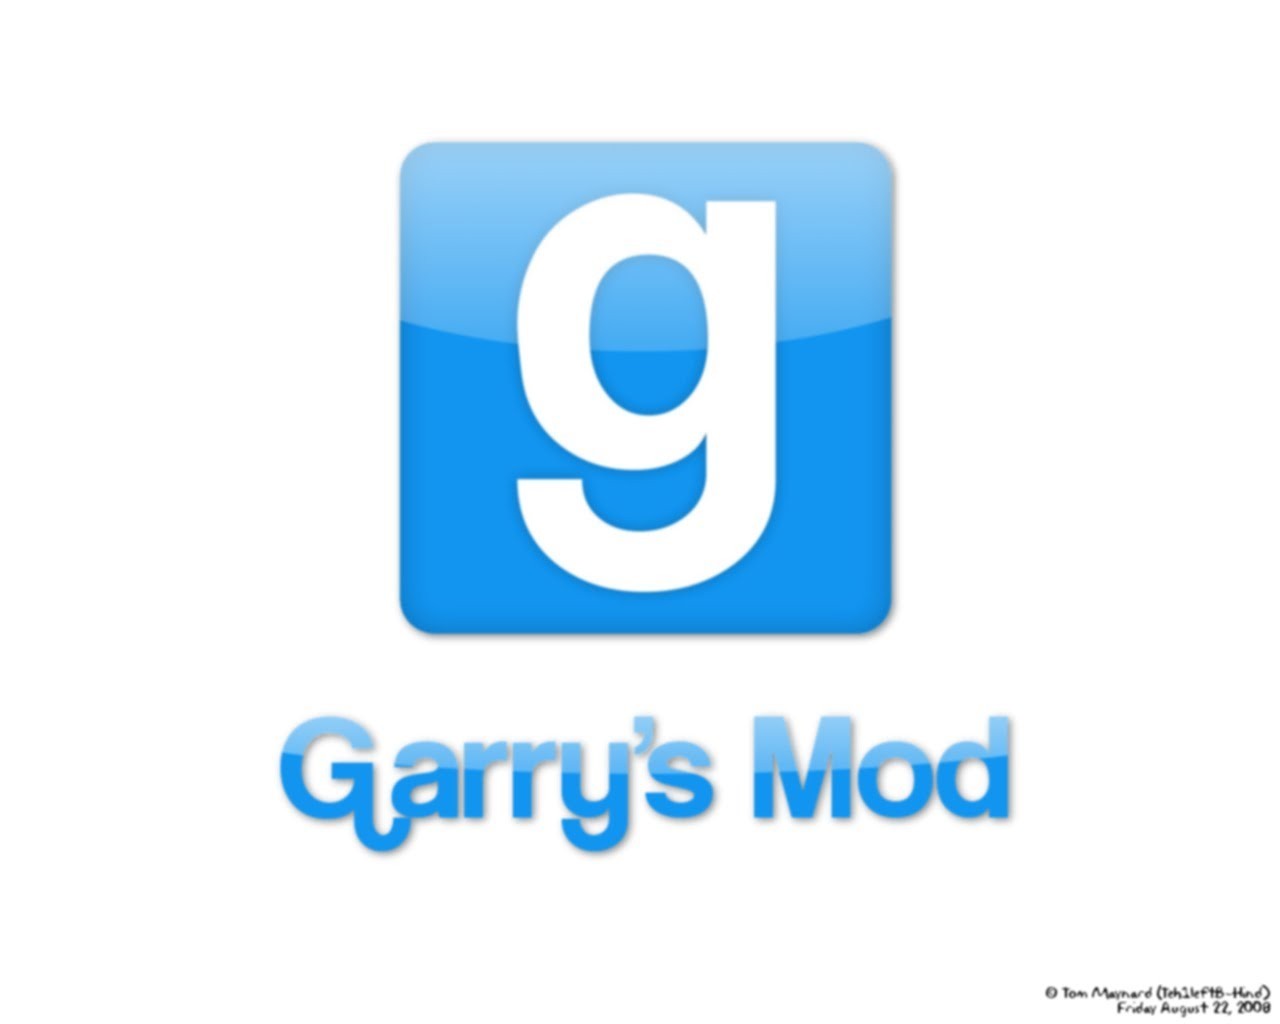 I Met Garry The Creator Of Garry S Mod On A Star Wars Rp Server Garry S Mod B2p - we are in gmod gmod roblox town roleplay